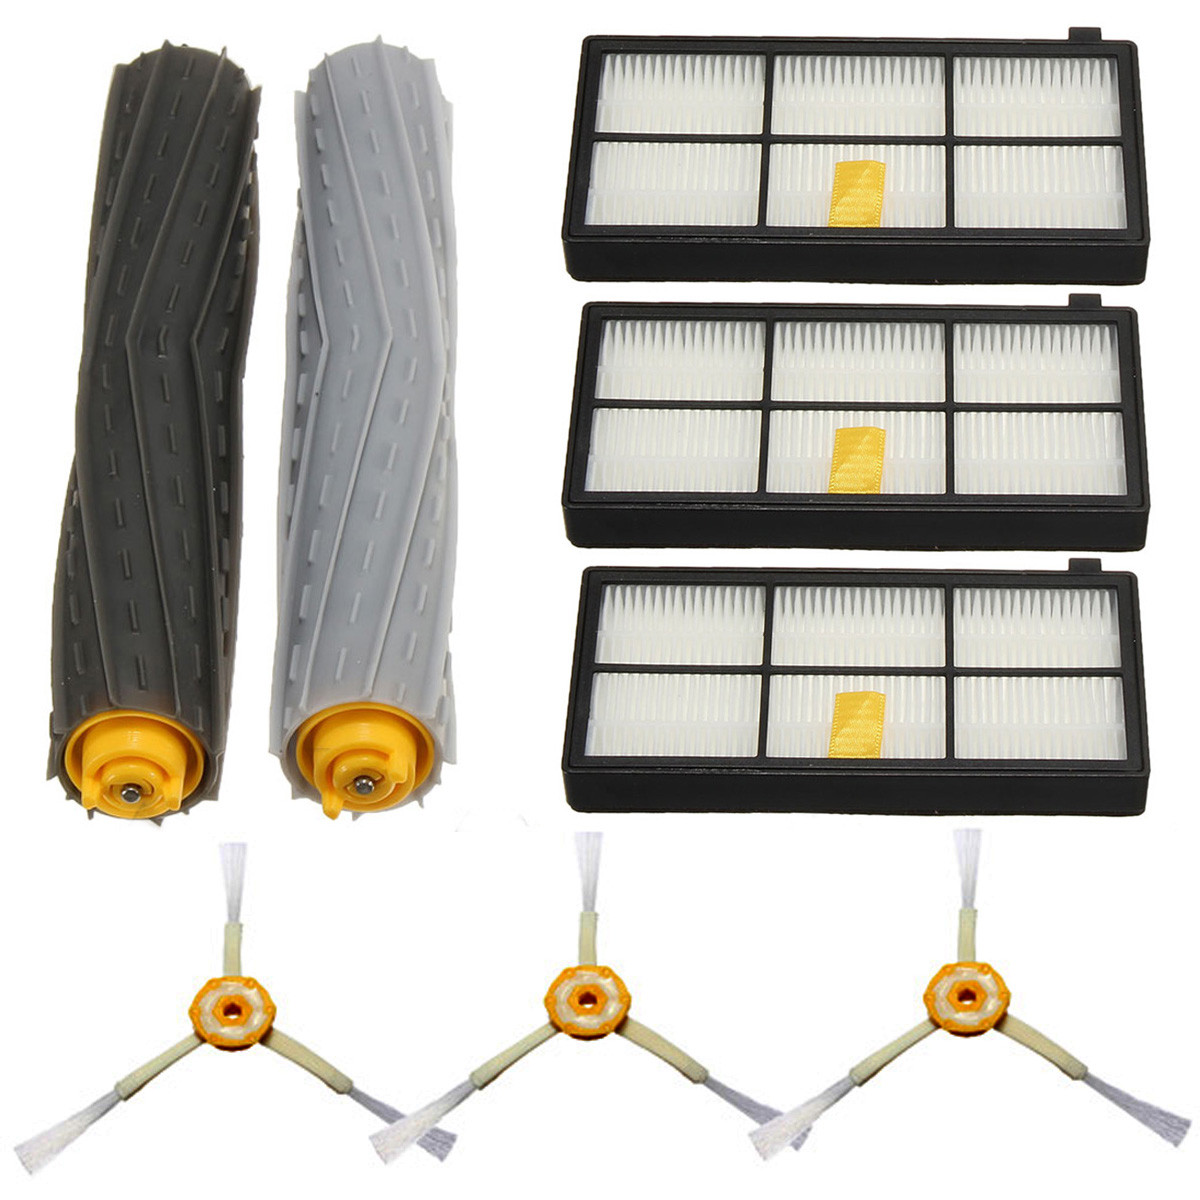 

8Pcs Filters Brush Pack Replacement Kit For iRobot Roomba 800 Series 800 870 880